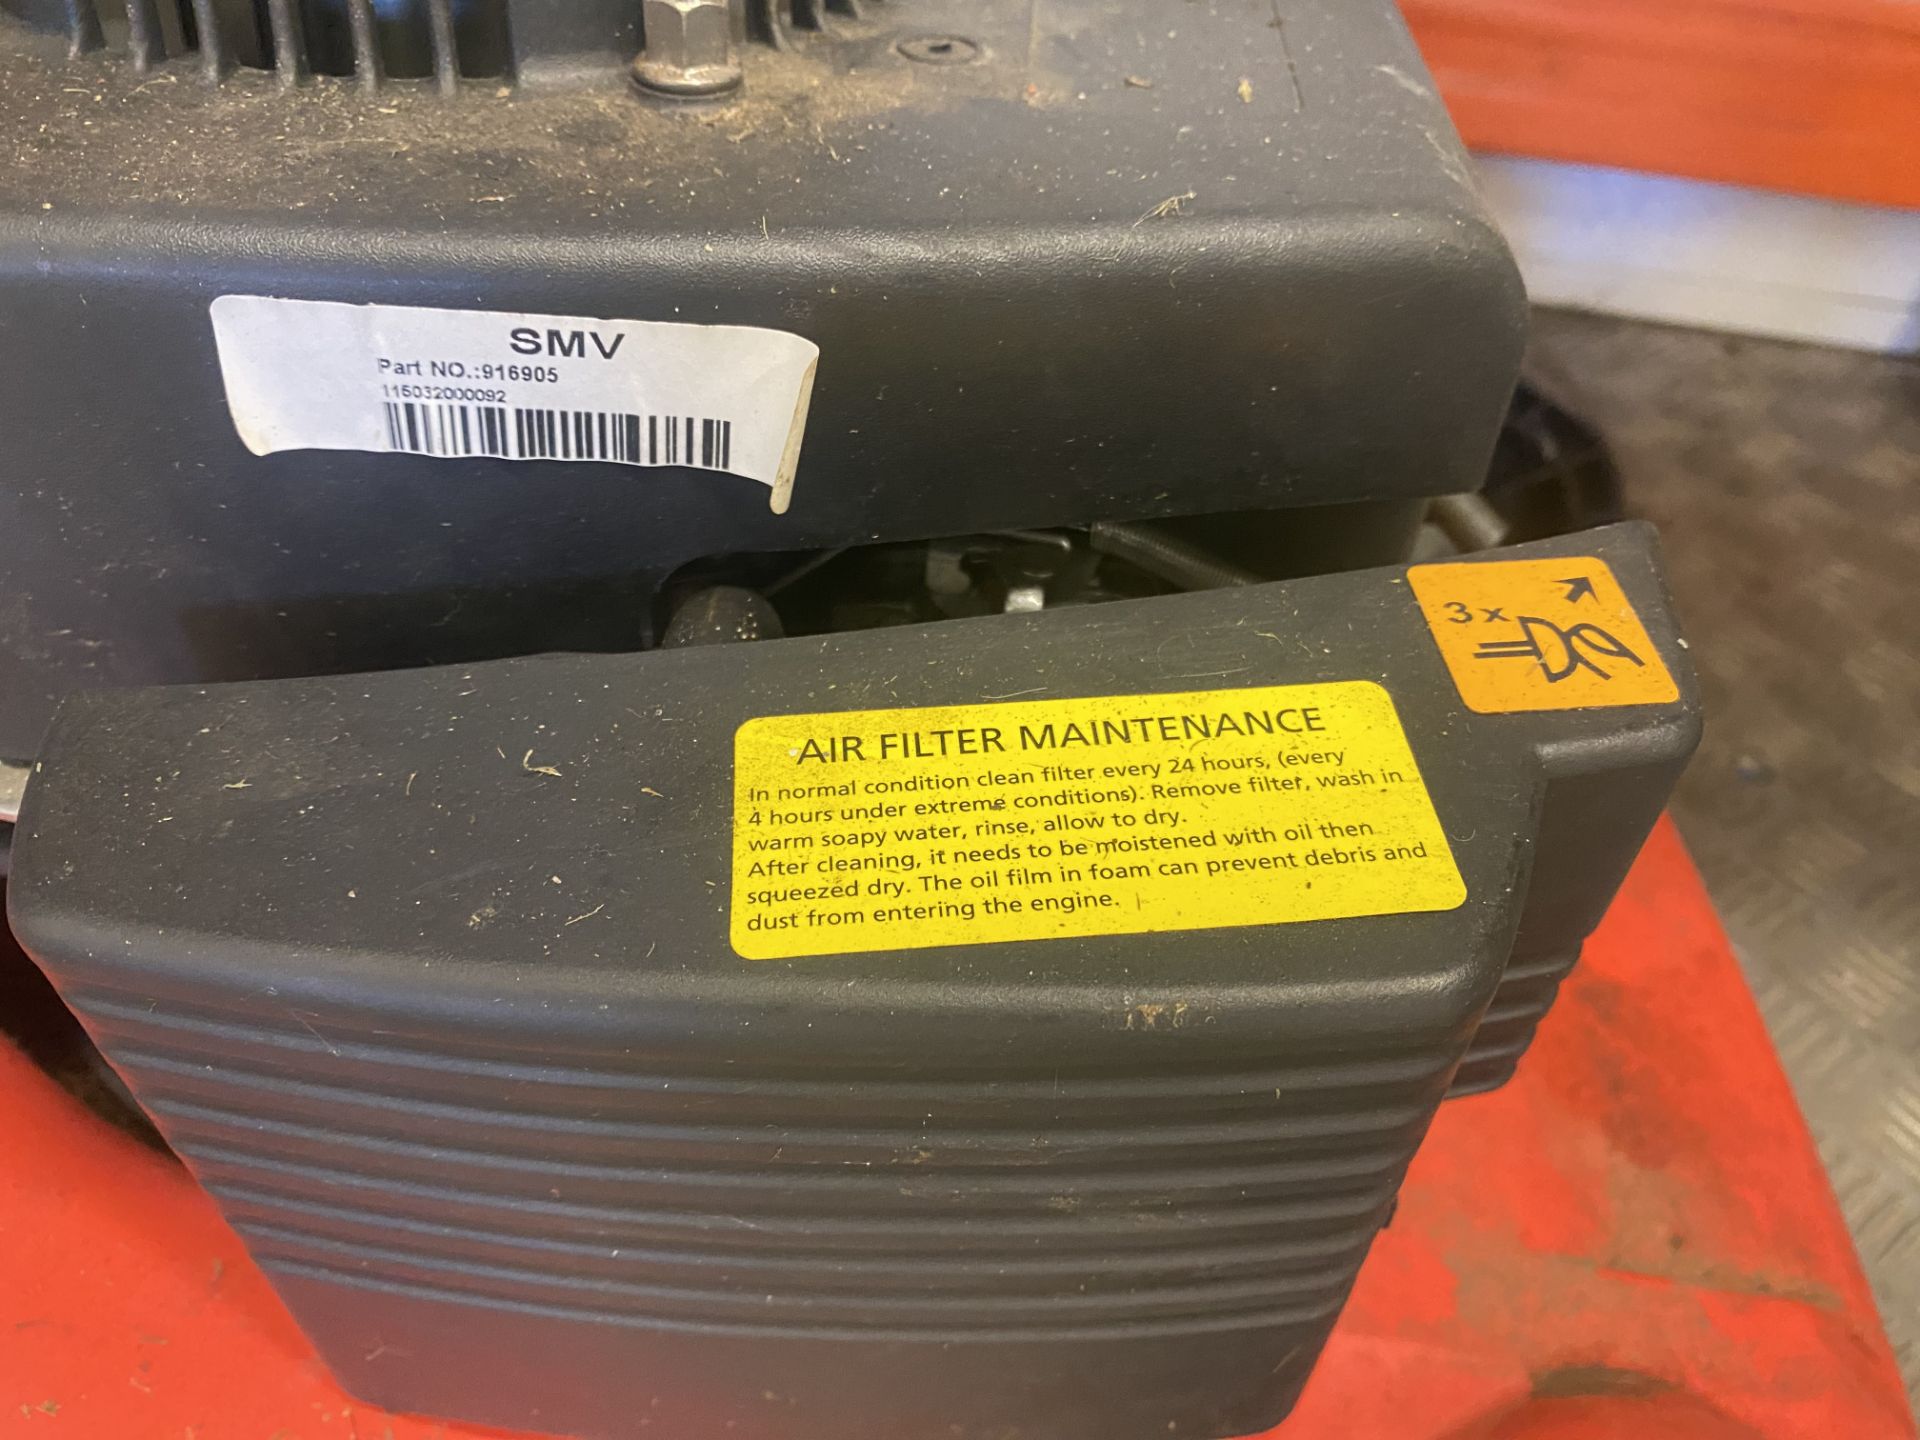 Unbranded petrol lawnmower (Working condition unknown) - Image 2 of 3